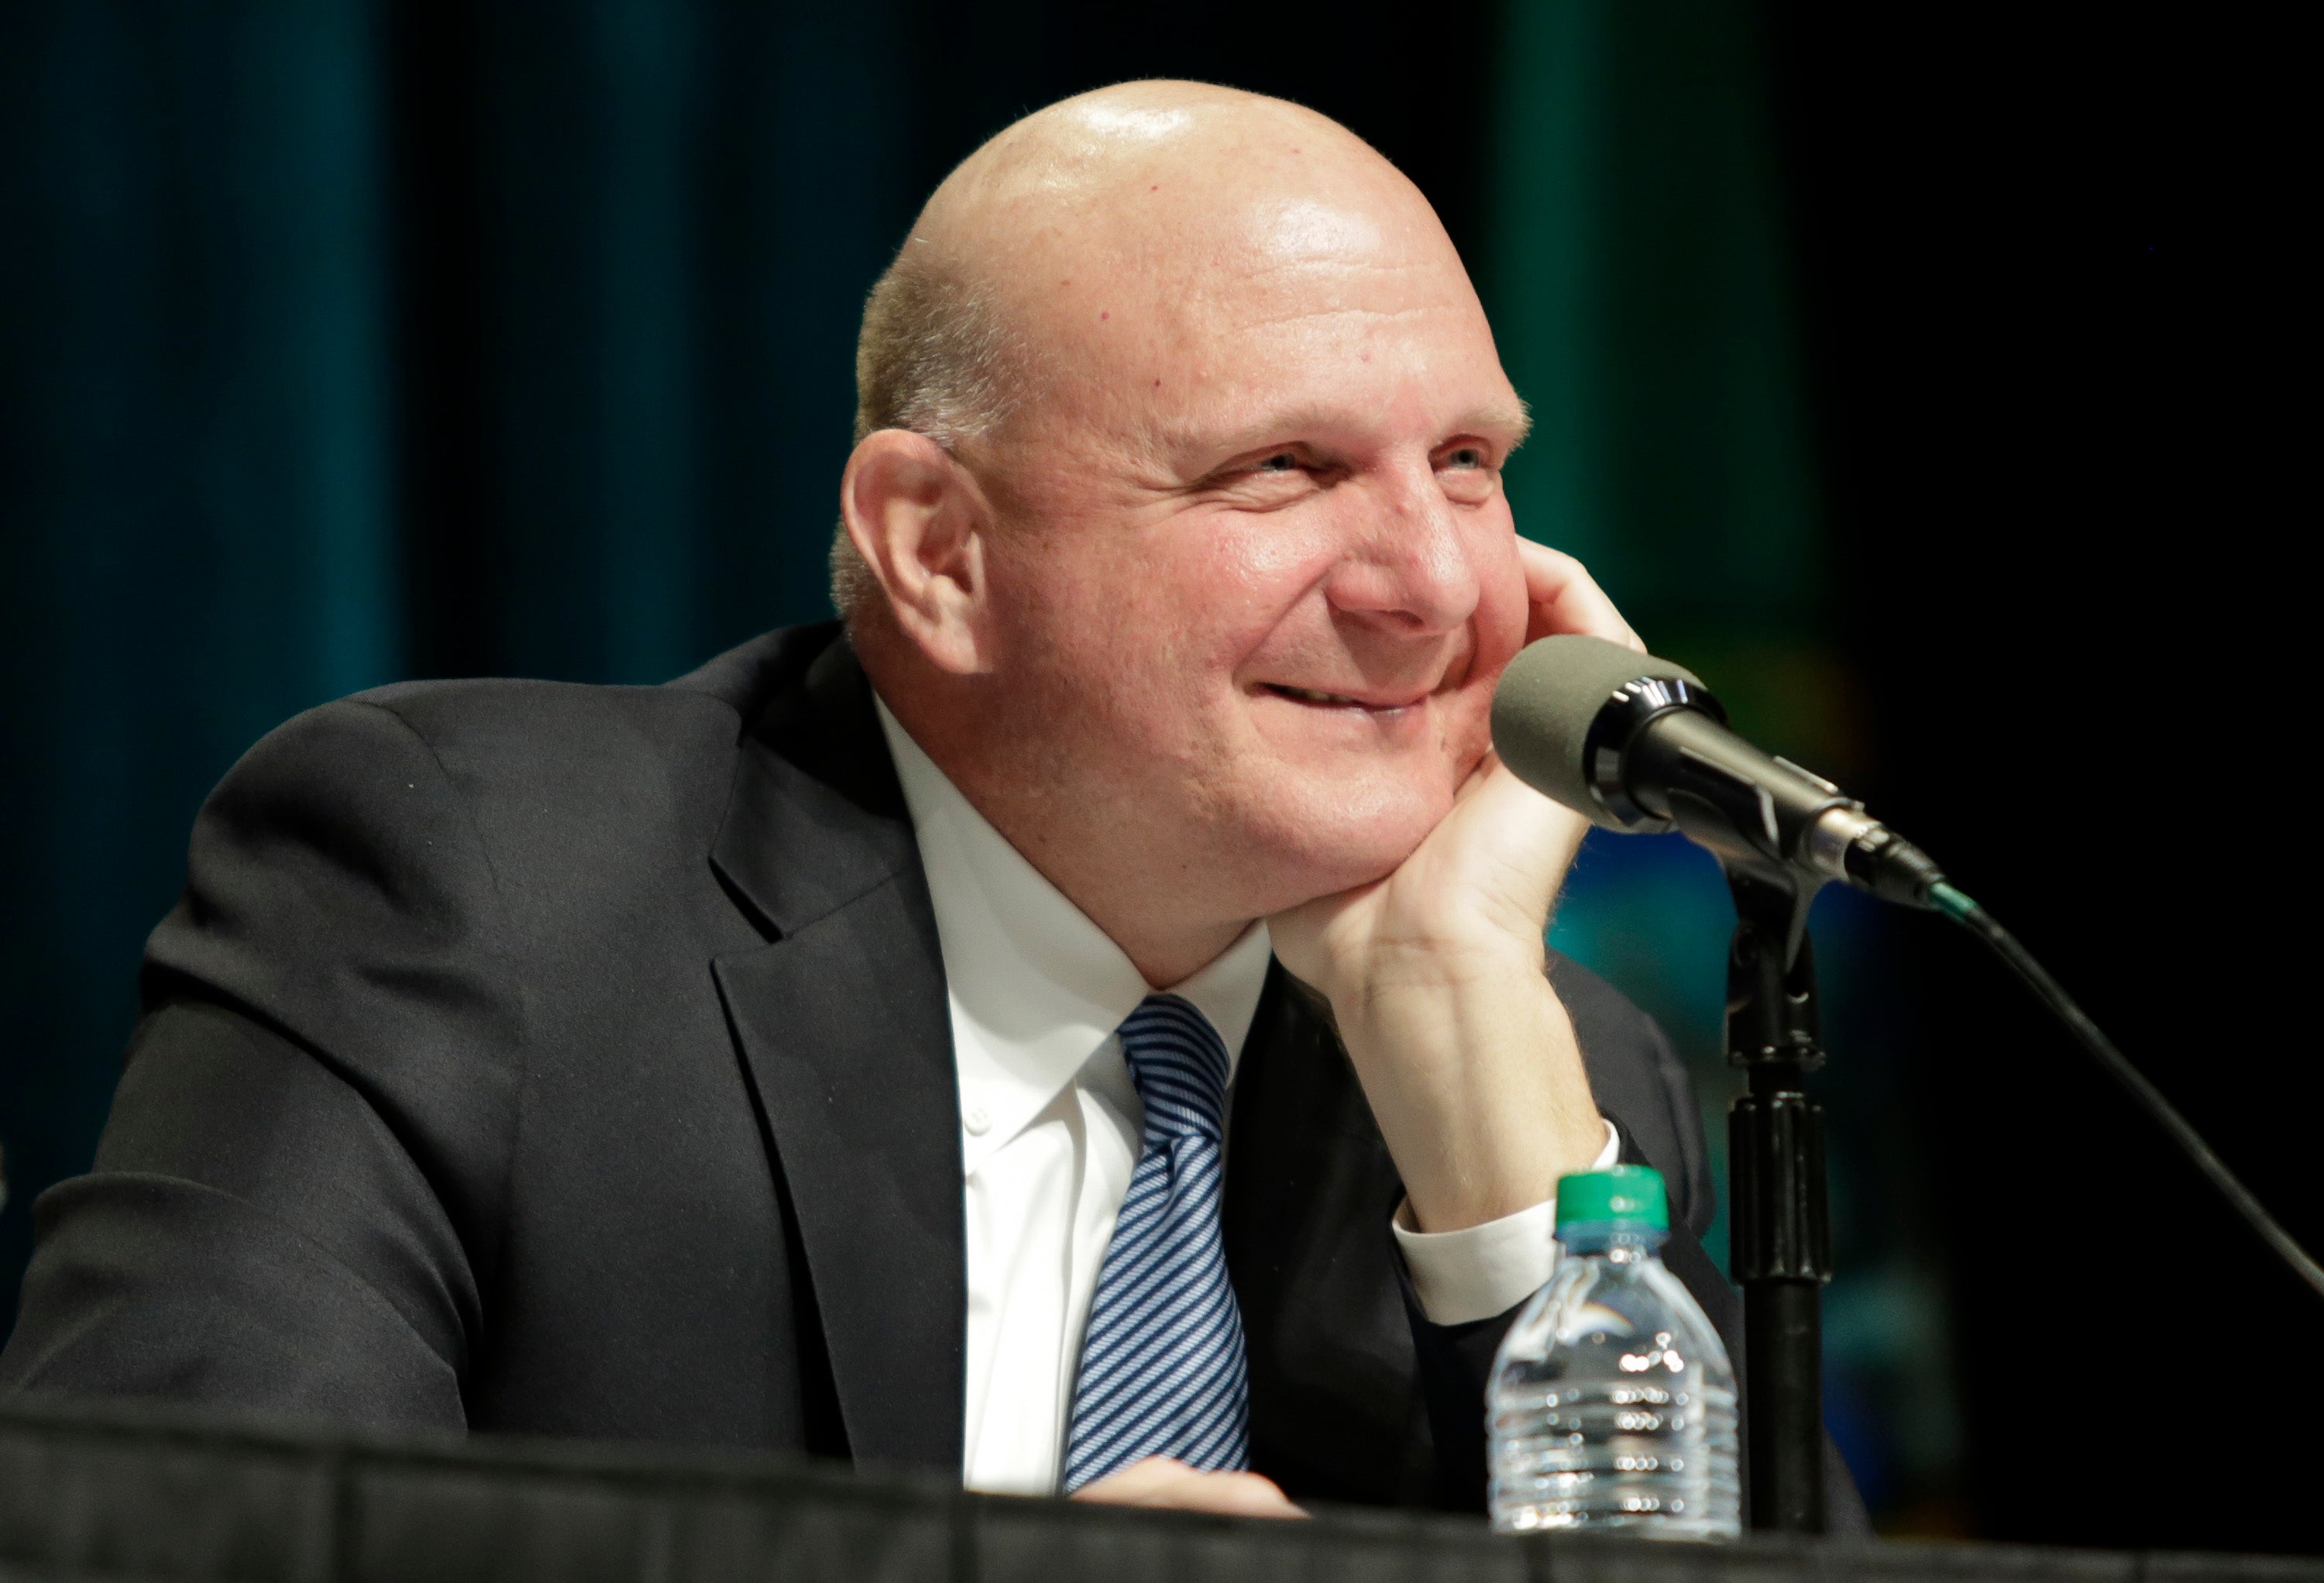 Outgoing CEO Steve Ballmer will be pleased by the boost during his last days at the company.